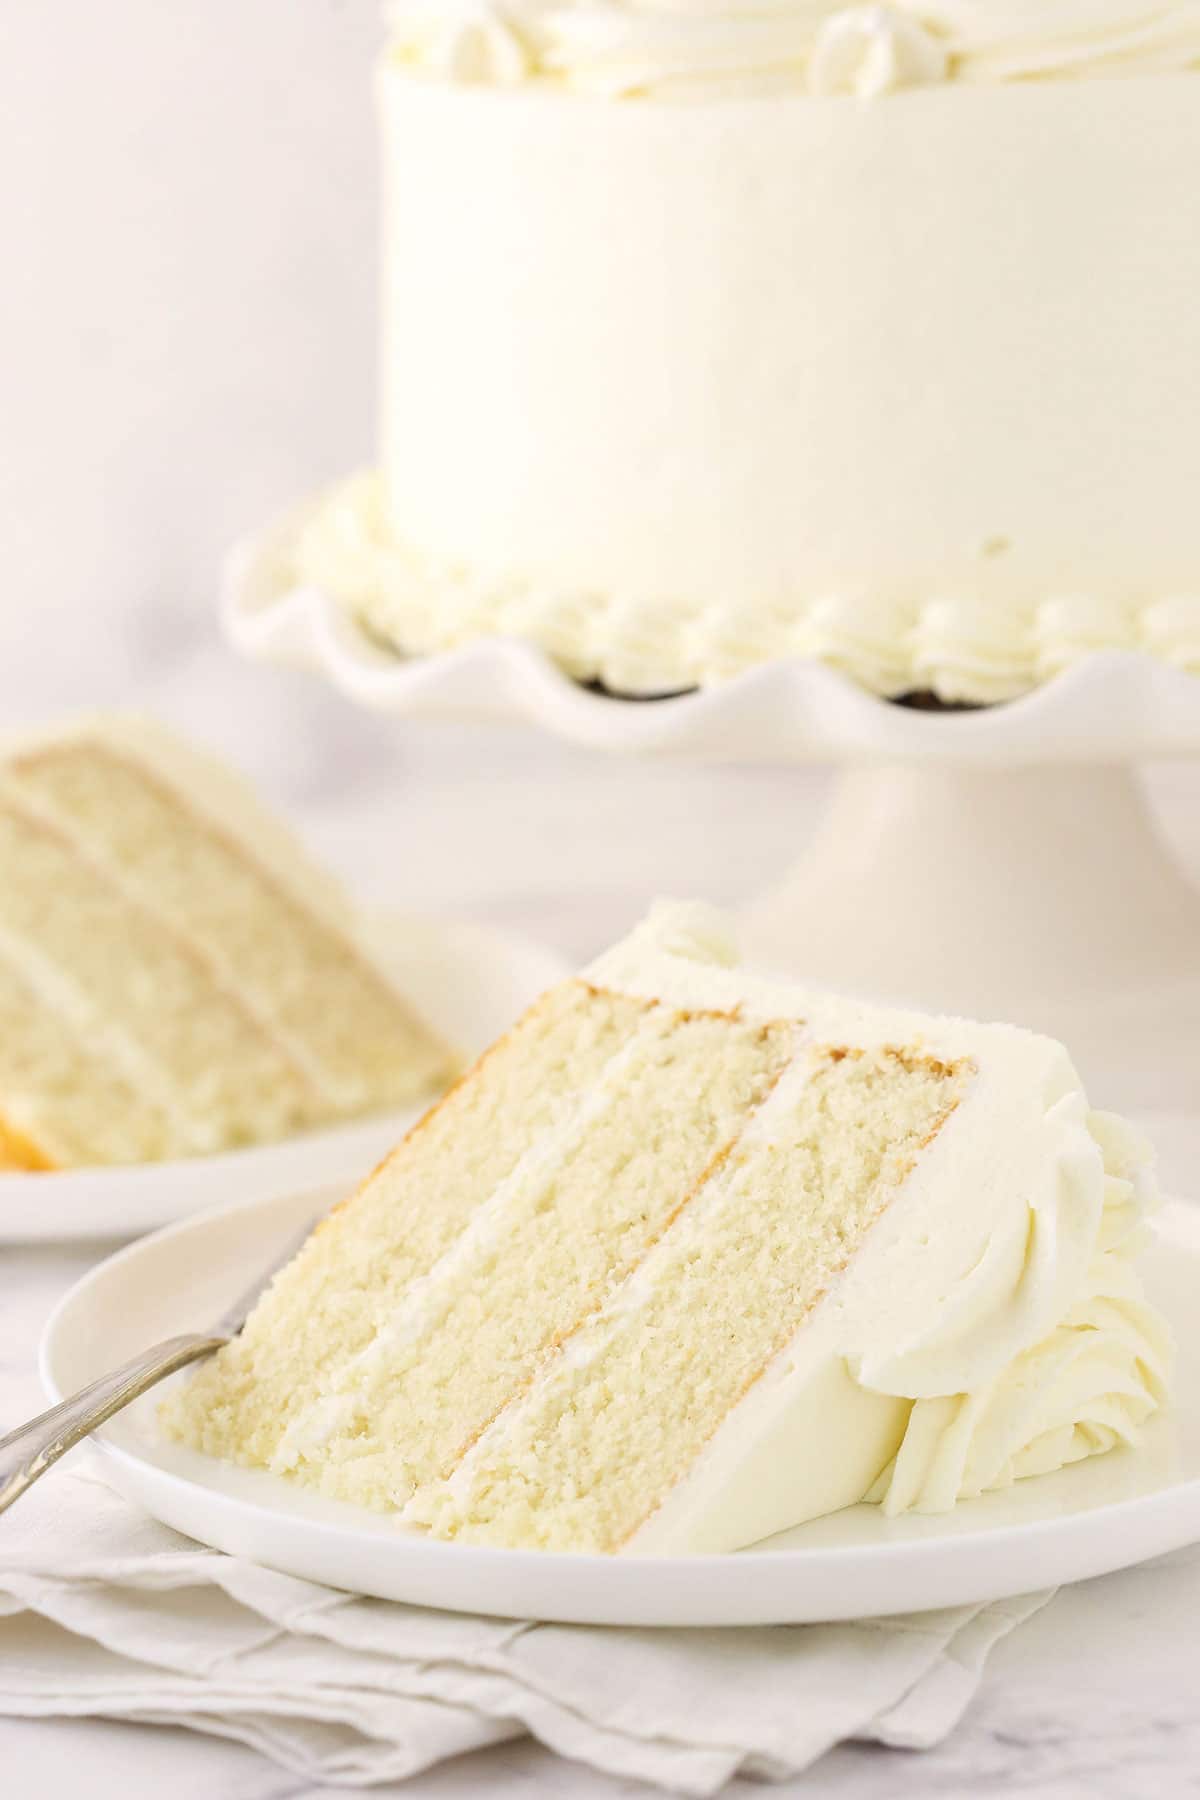 A big slice of vanilla layer cake on a plate with the full cake on a cake stand in the background